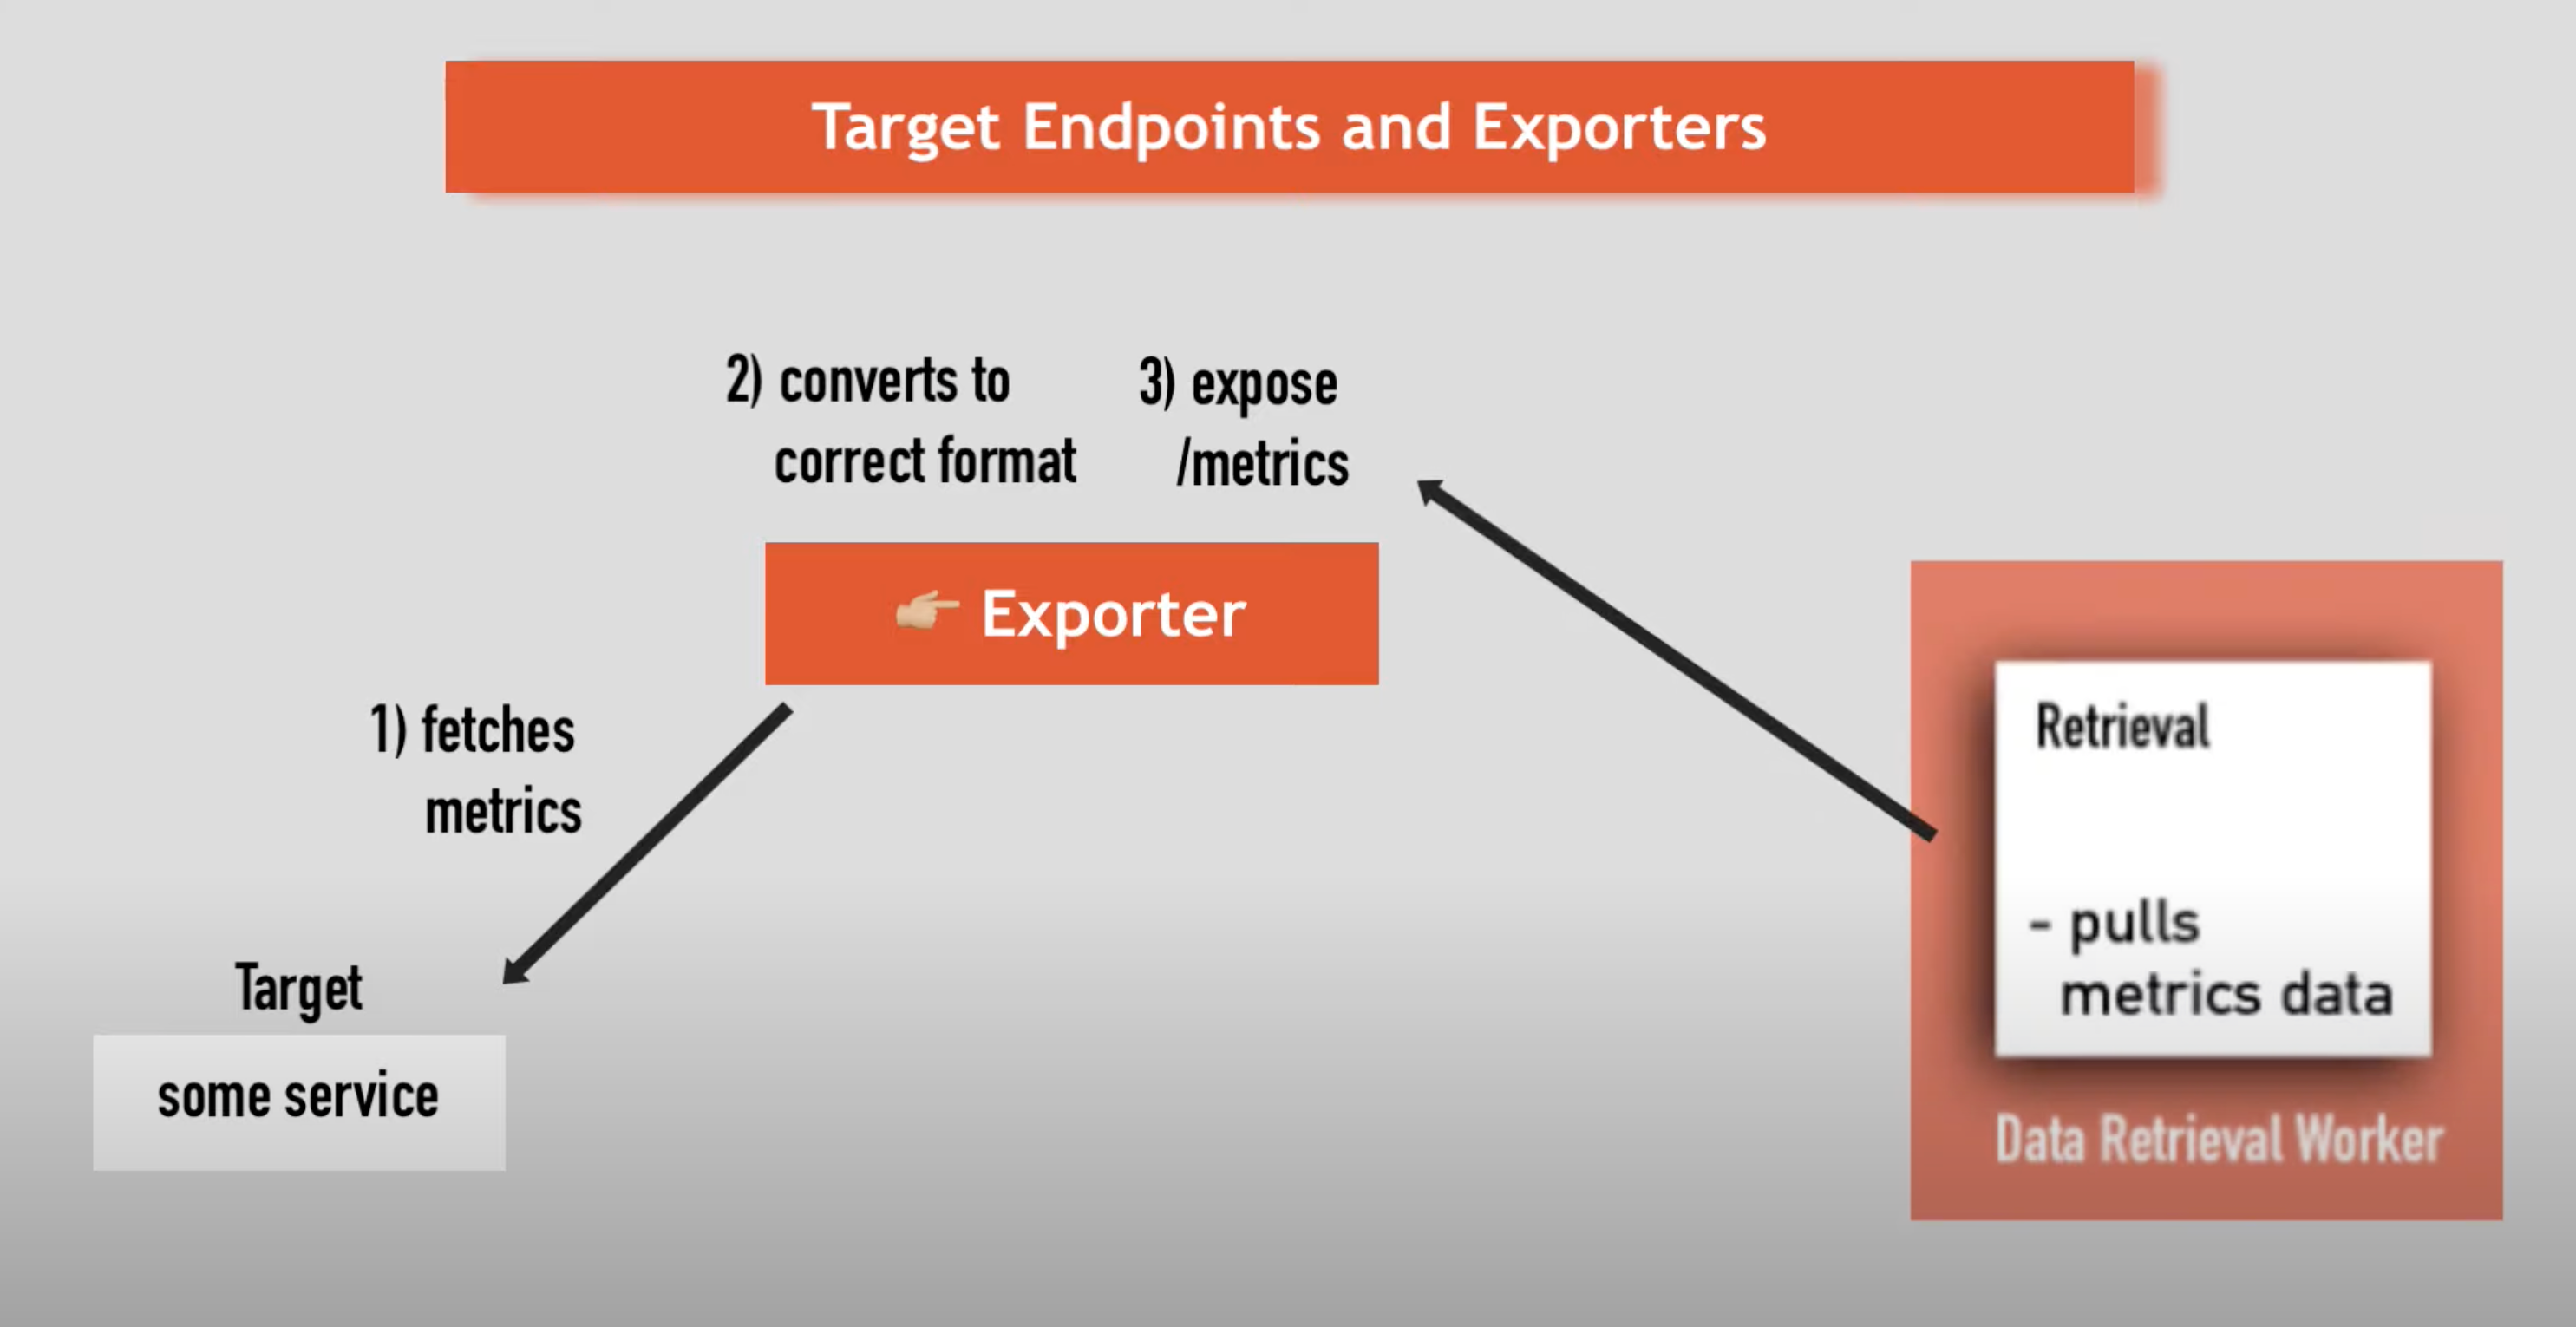 Target Endpoints and Exporters